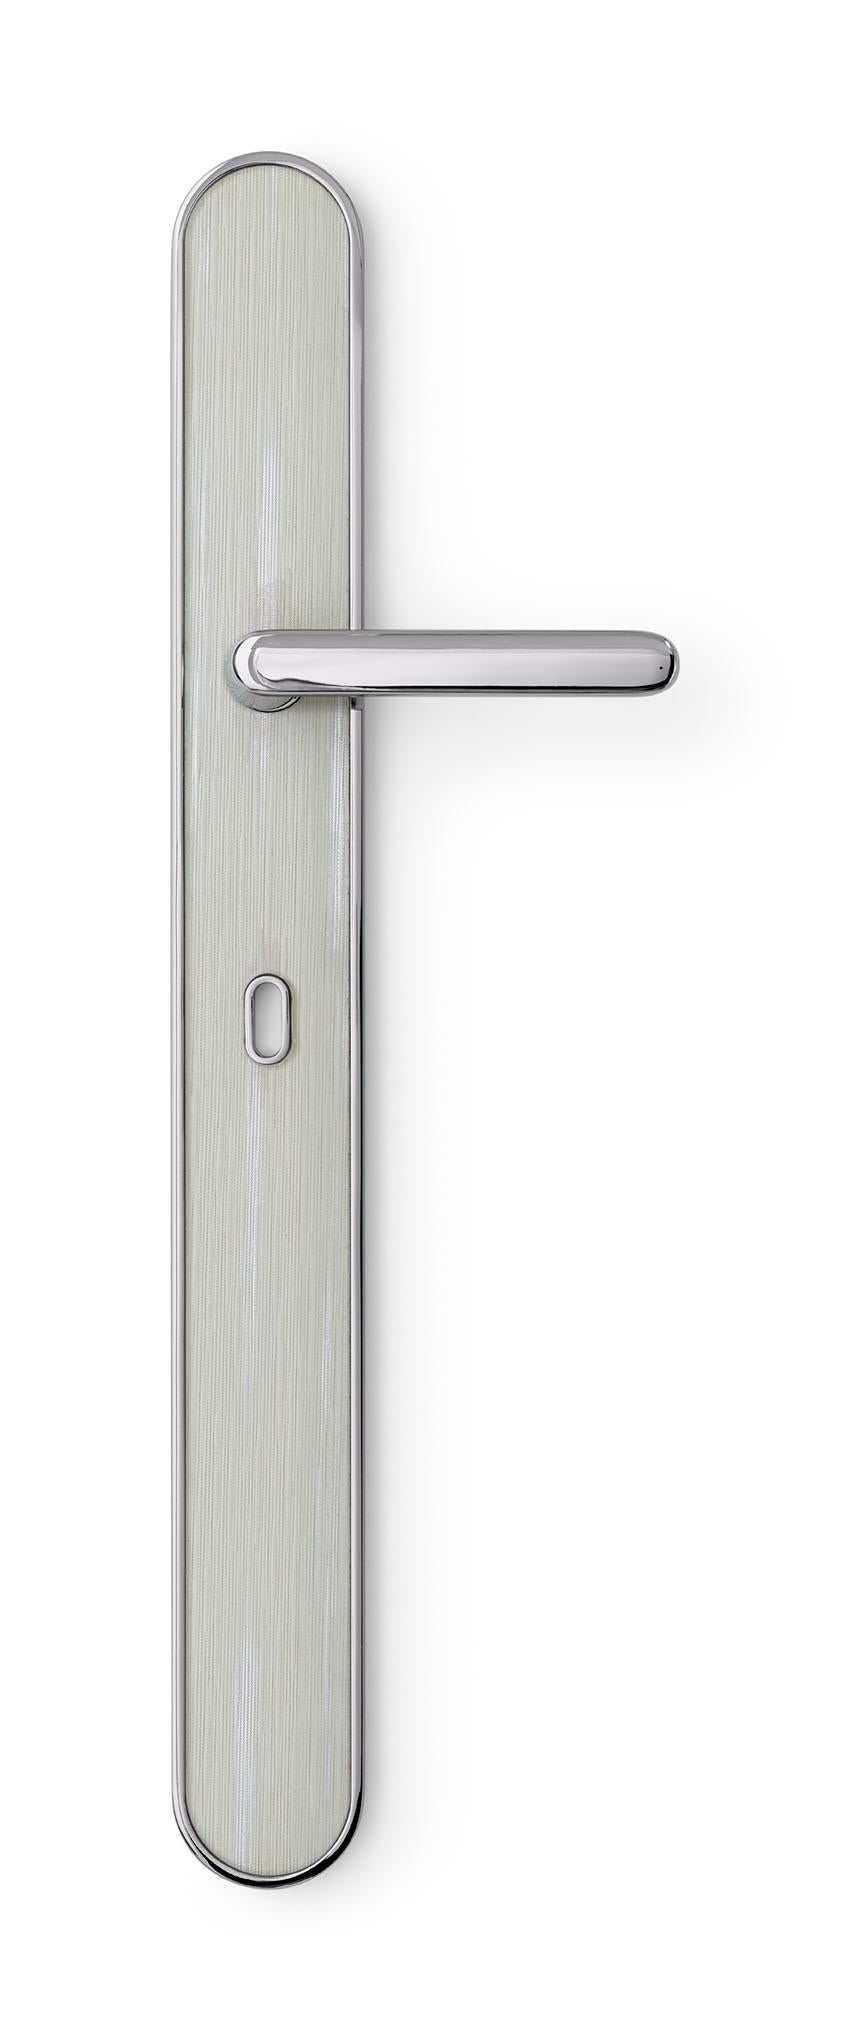 Contemporary Door Handle Aluminum Plate Brass Handle Body Polished Chrome Finished Vetrite For Sale